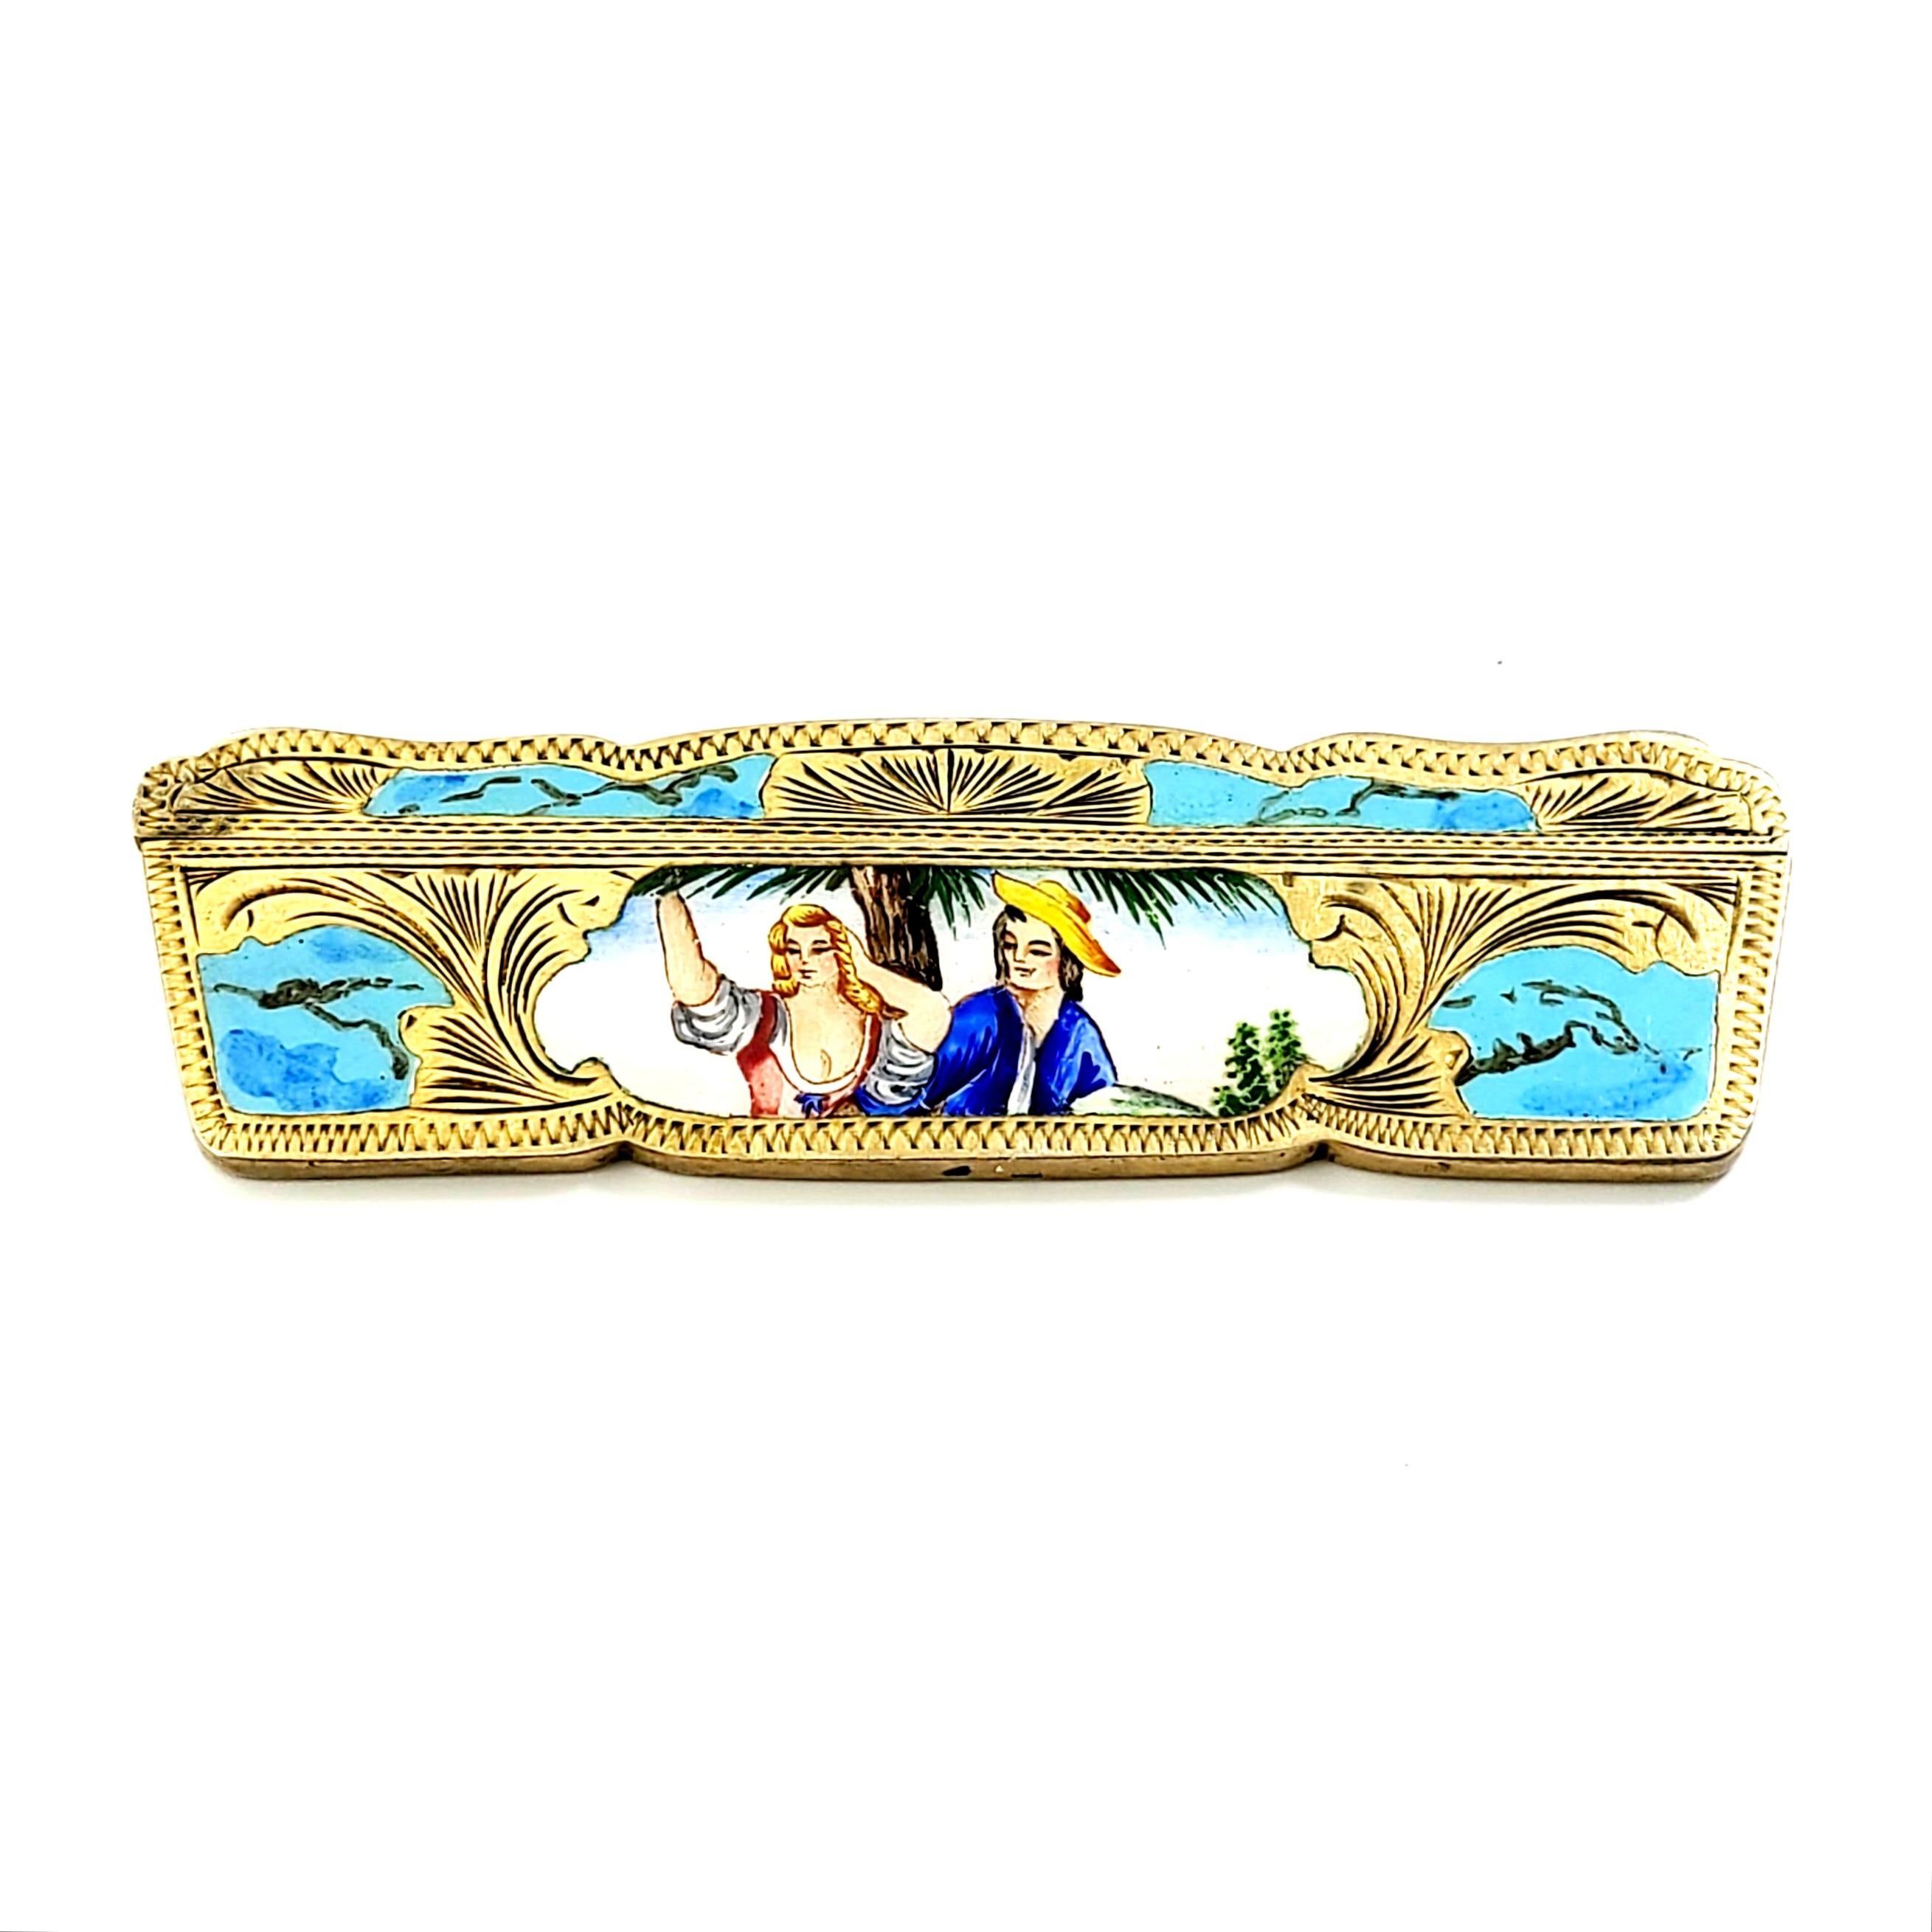 Antique Italian 800 silver with gold vermeil and hand painted enamel comb.

Beautiful gold vermeil over 800 silver, featuring an etched scroll design. Hand painted Italian lovers scene on one side, with painted faux turquoise details. Tortoise